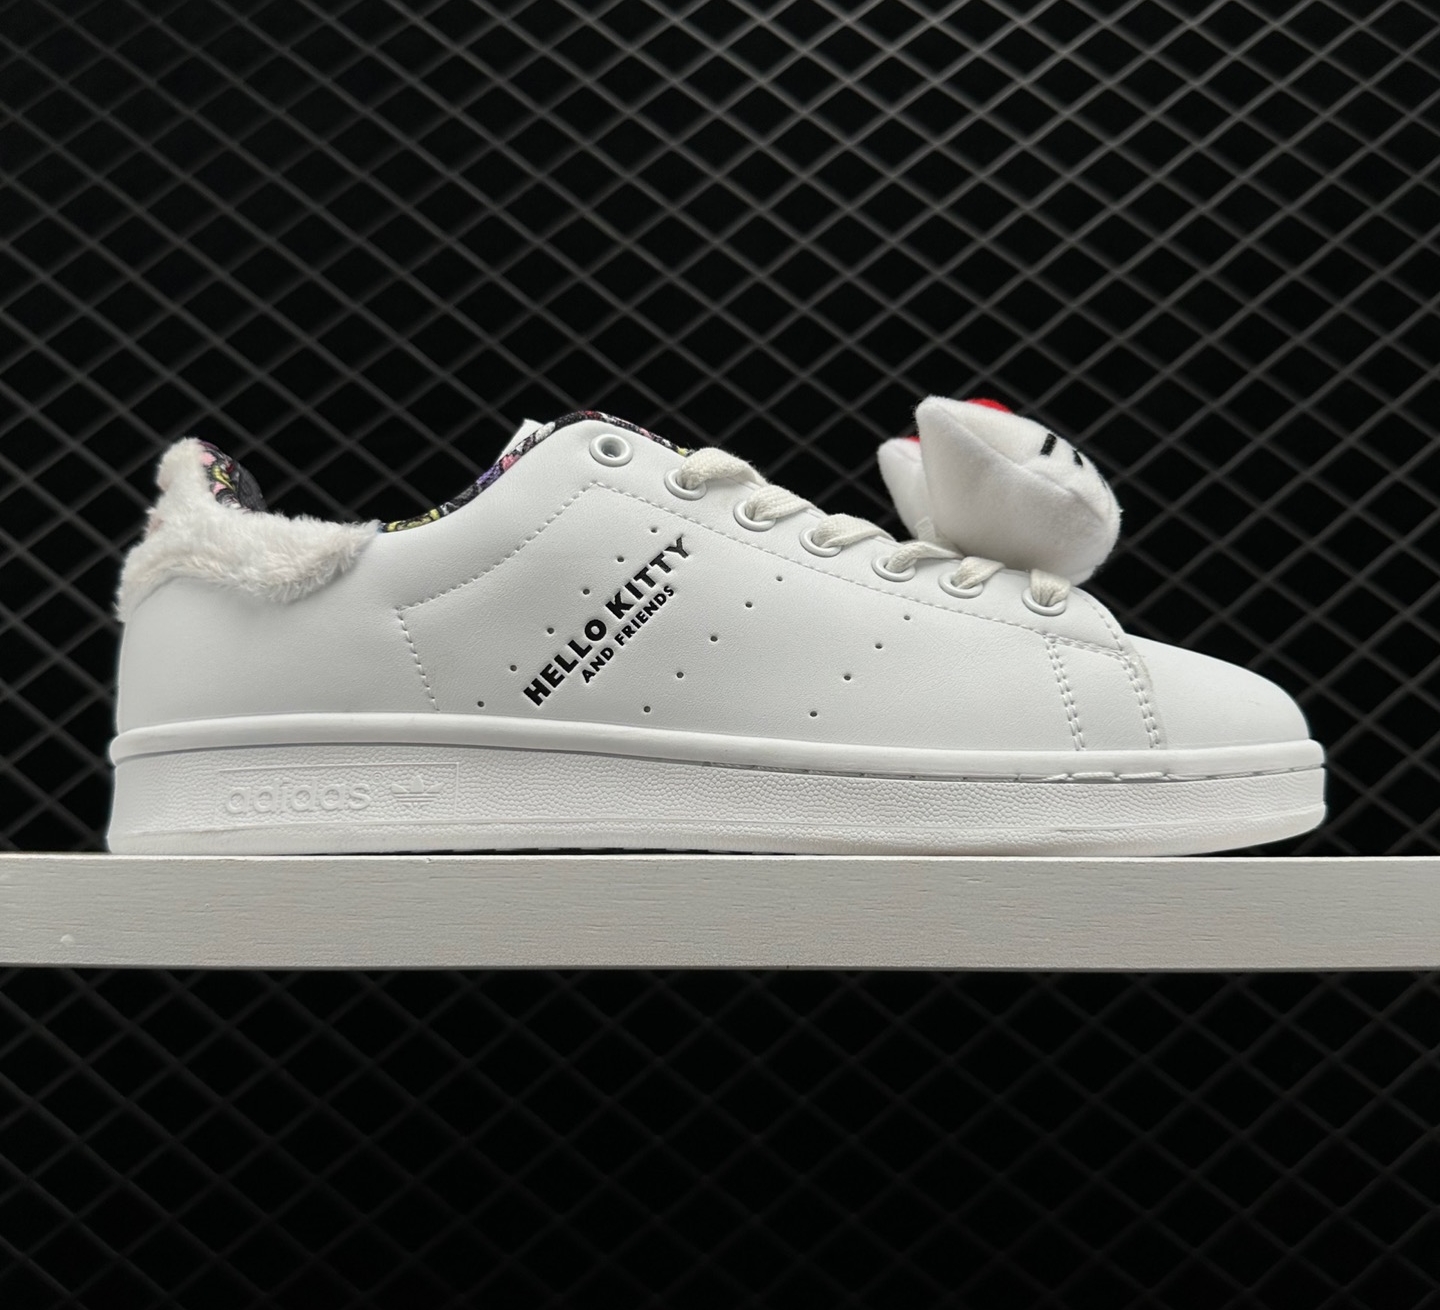 Adidas Originals Stan Smith X Hello Kitty 'Cloud White' - Limited Edition!